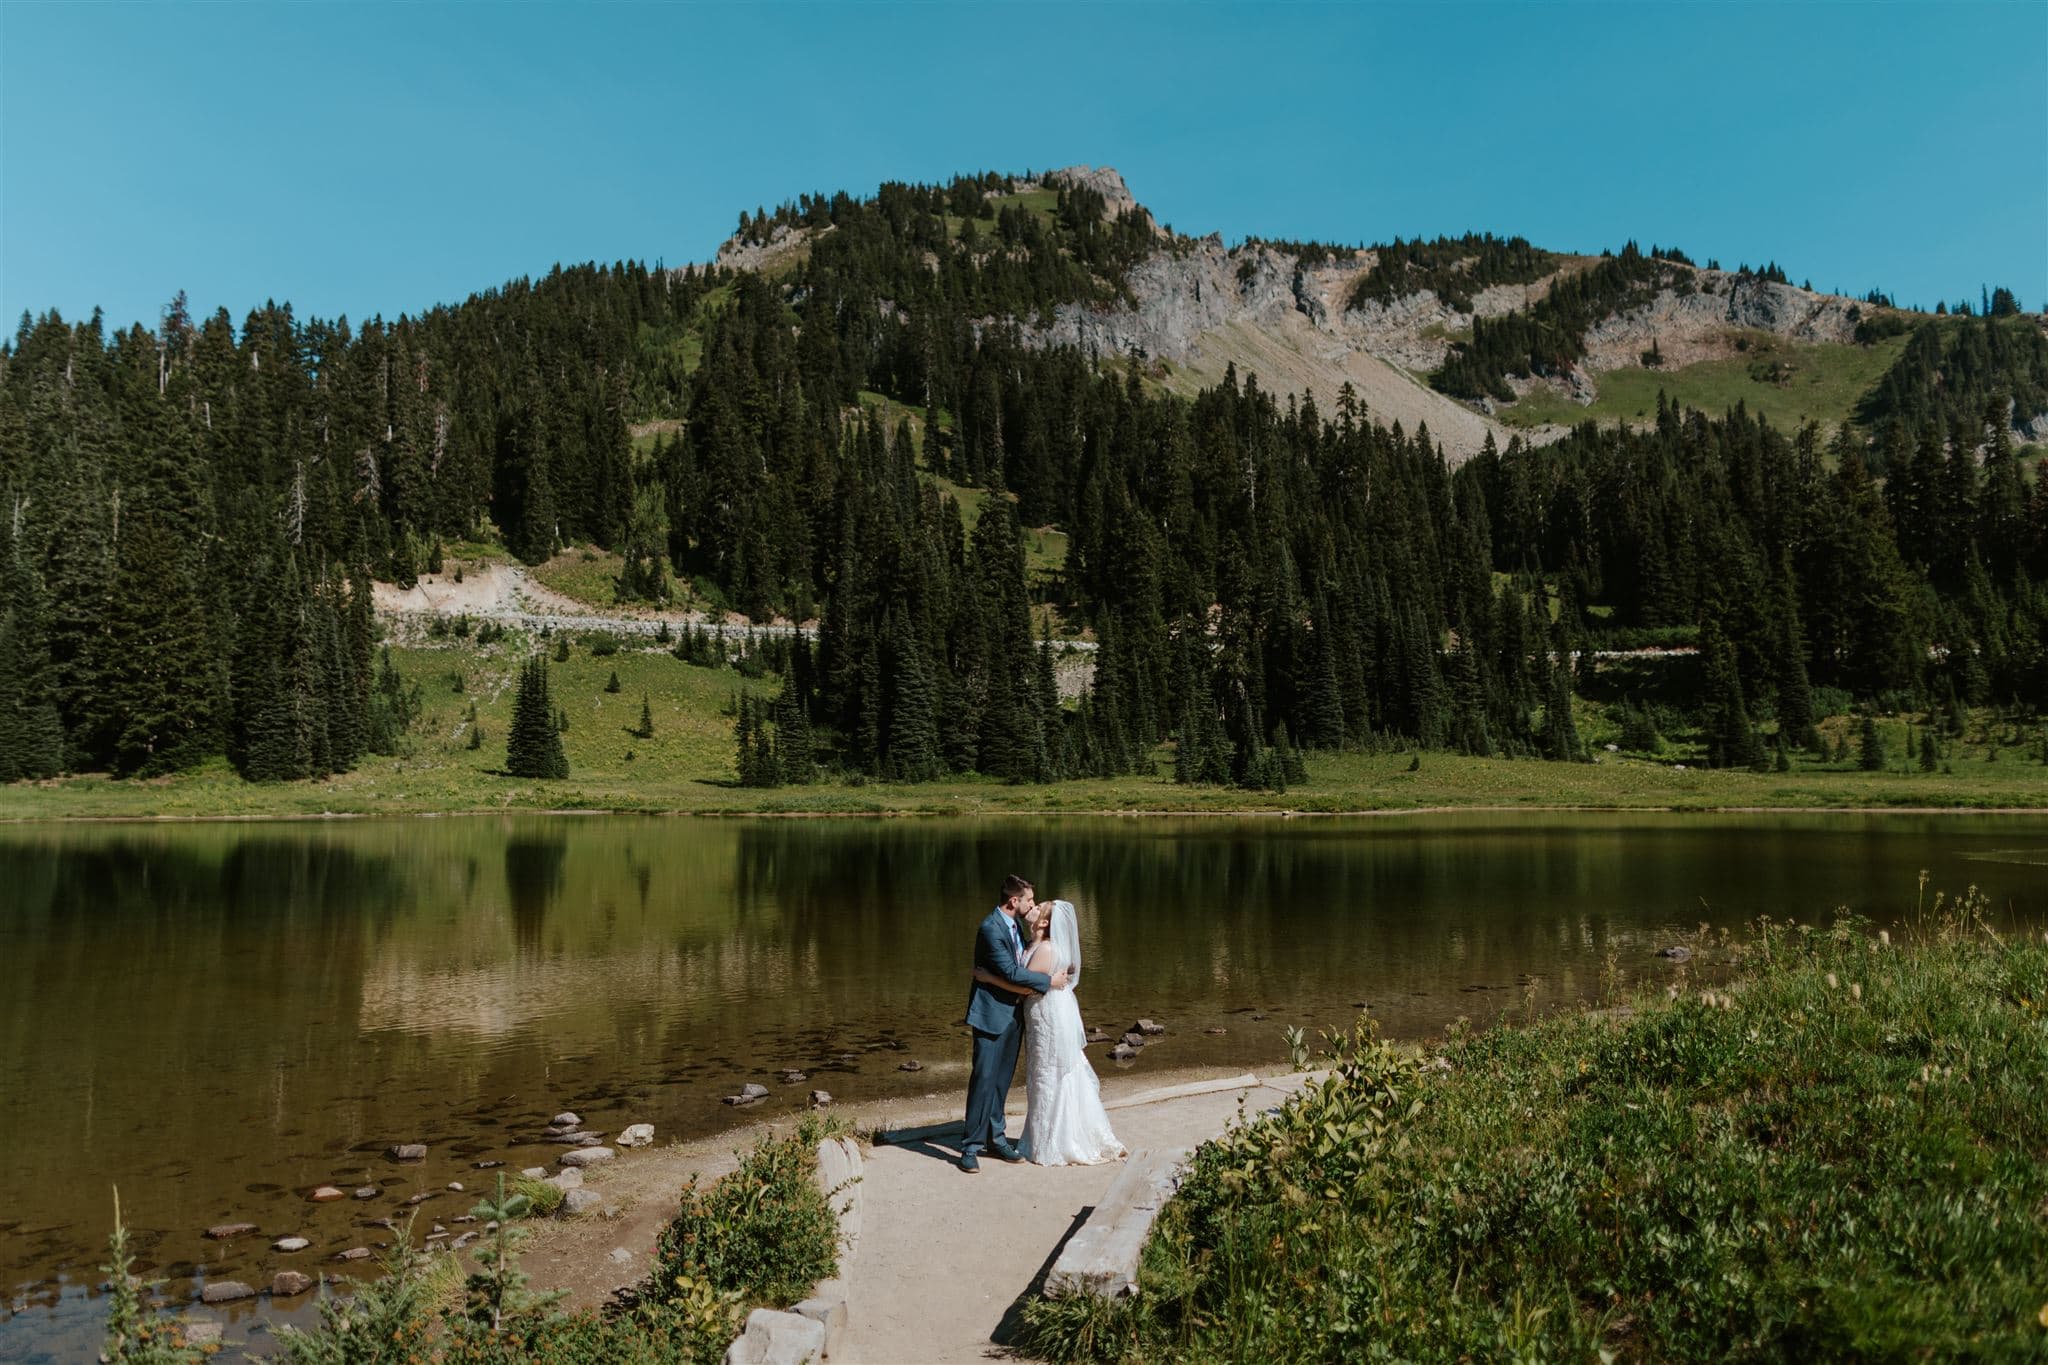 A couple in wedding attire kissing at Tipsoo Lake.